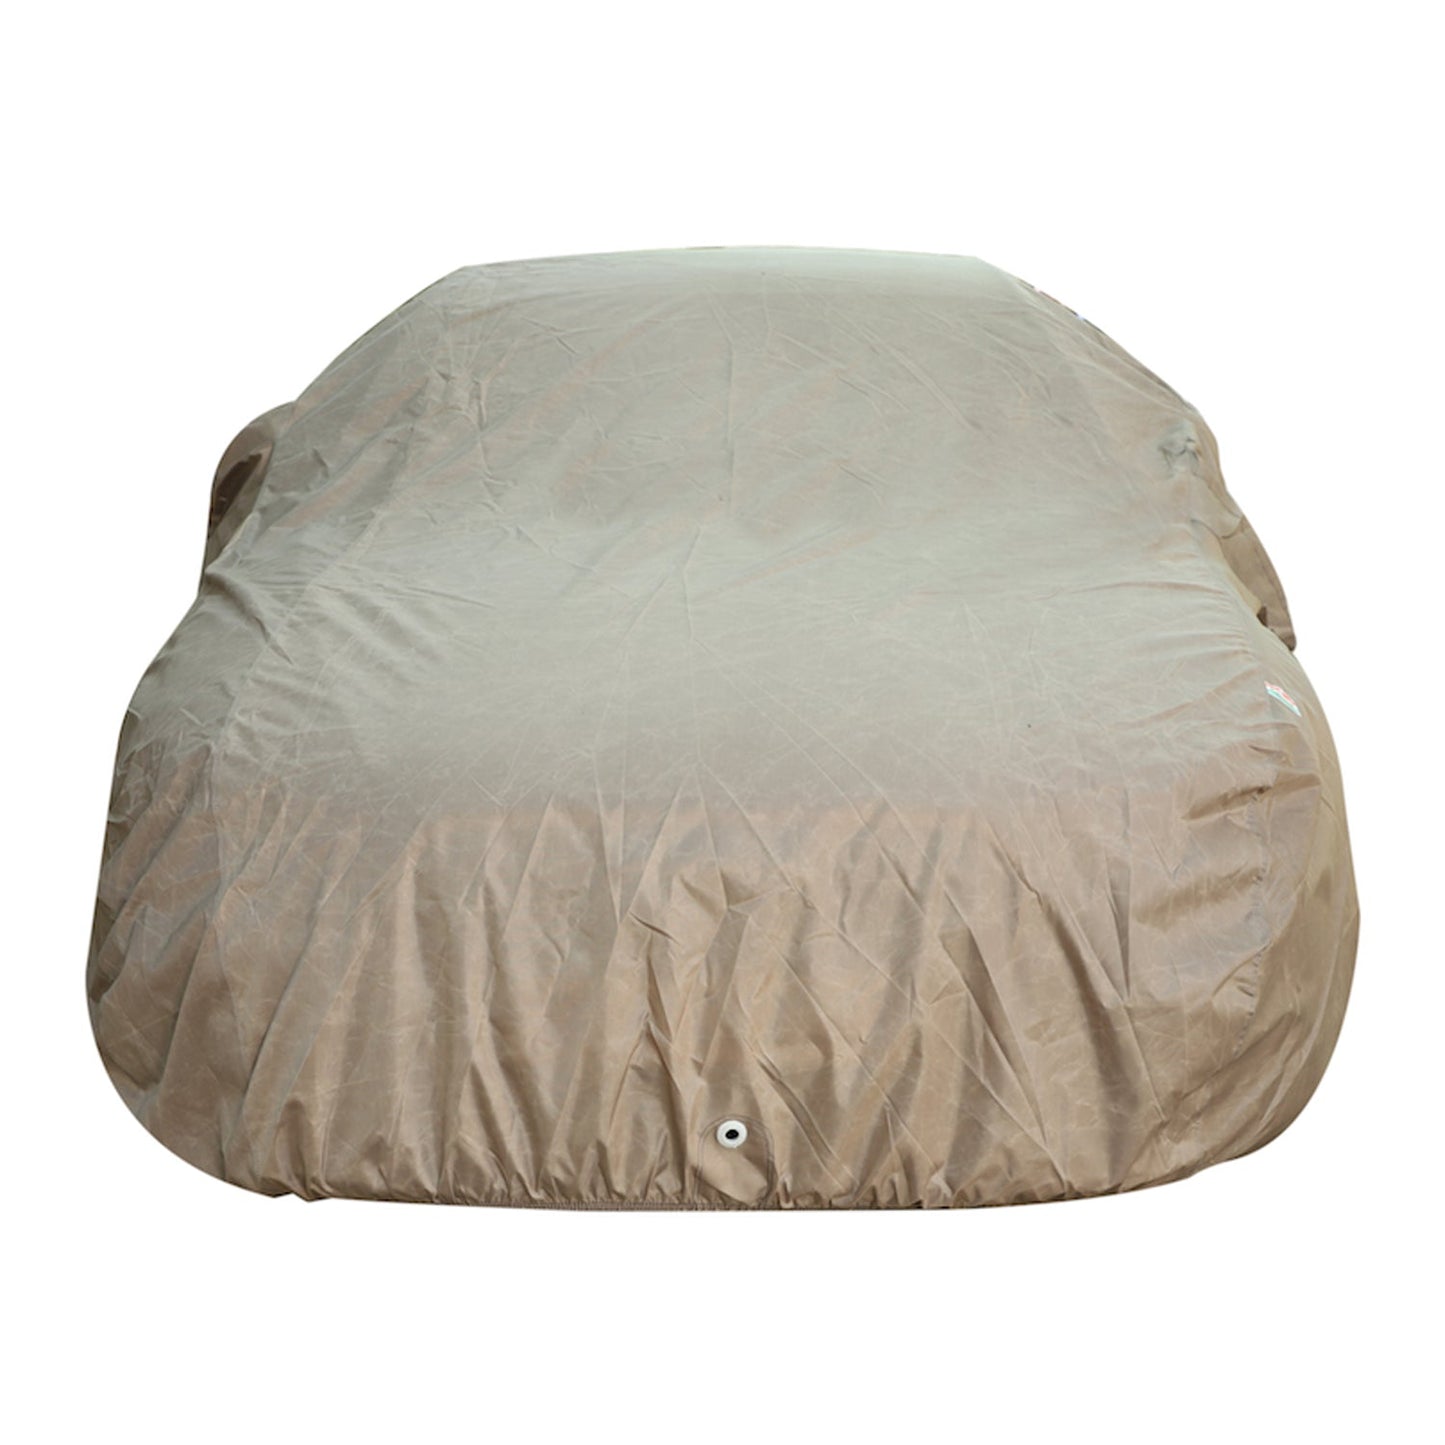 Oshotto Brown 100% Waterproof Car Body Cover with Mirror Pockets For KIA Carens